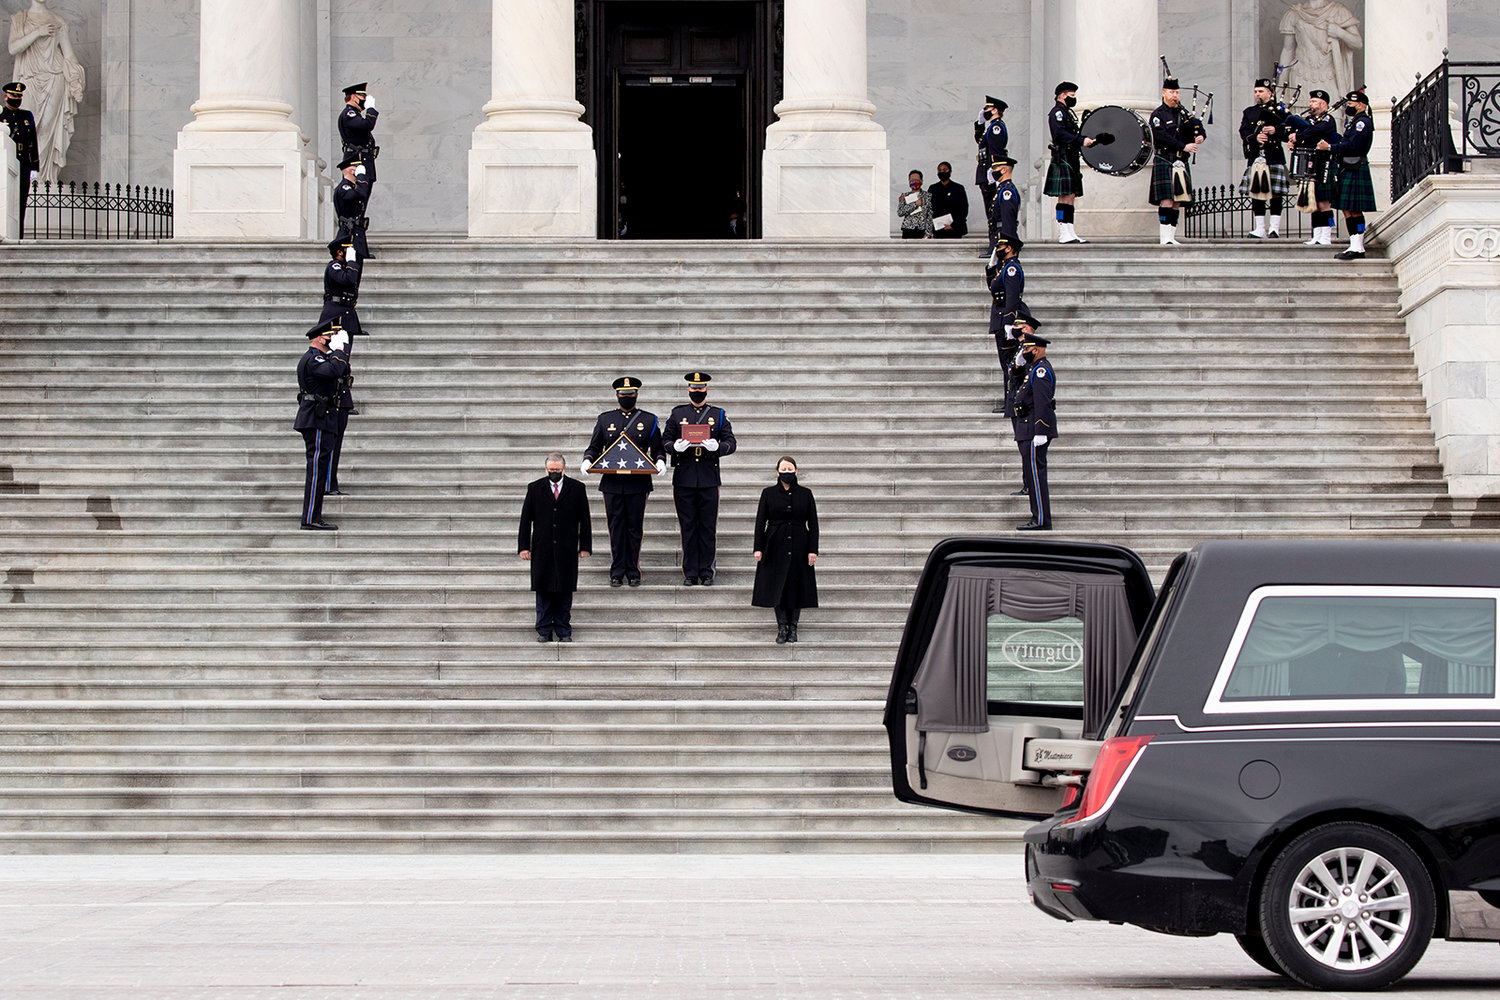 The remains of Capitol Police Officer Brian Sicknick are carried down the East Front steps after lying in honor in the Rotunda of the U.S. Capitol on Feb. 3, 2021, in Washington, DC. Officer Sicknick died as a result of injuries he sustained during the Jan. 6 attack on the U.S. Capitol. (Michael Reynolds/Pool/Getty Images/TNS)